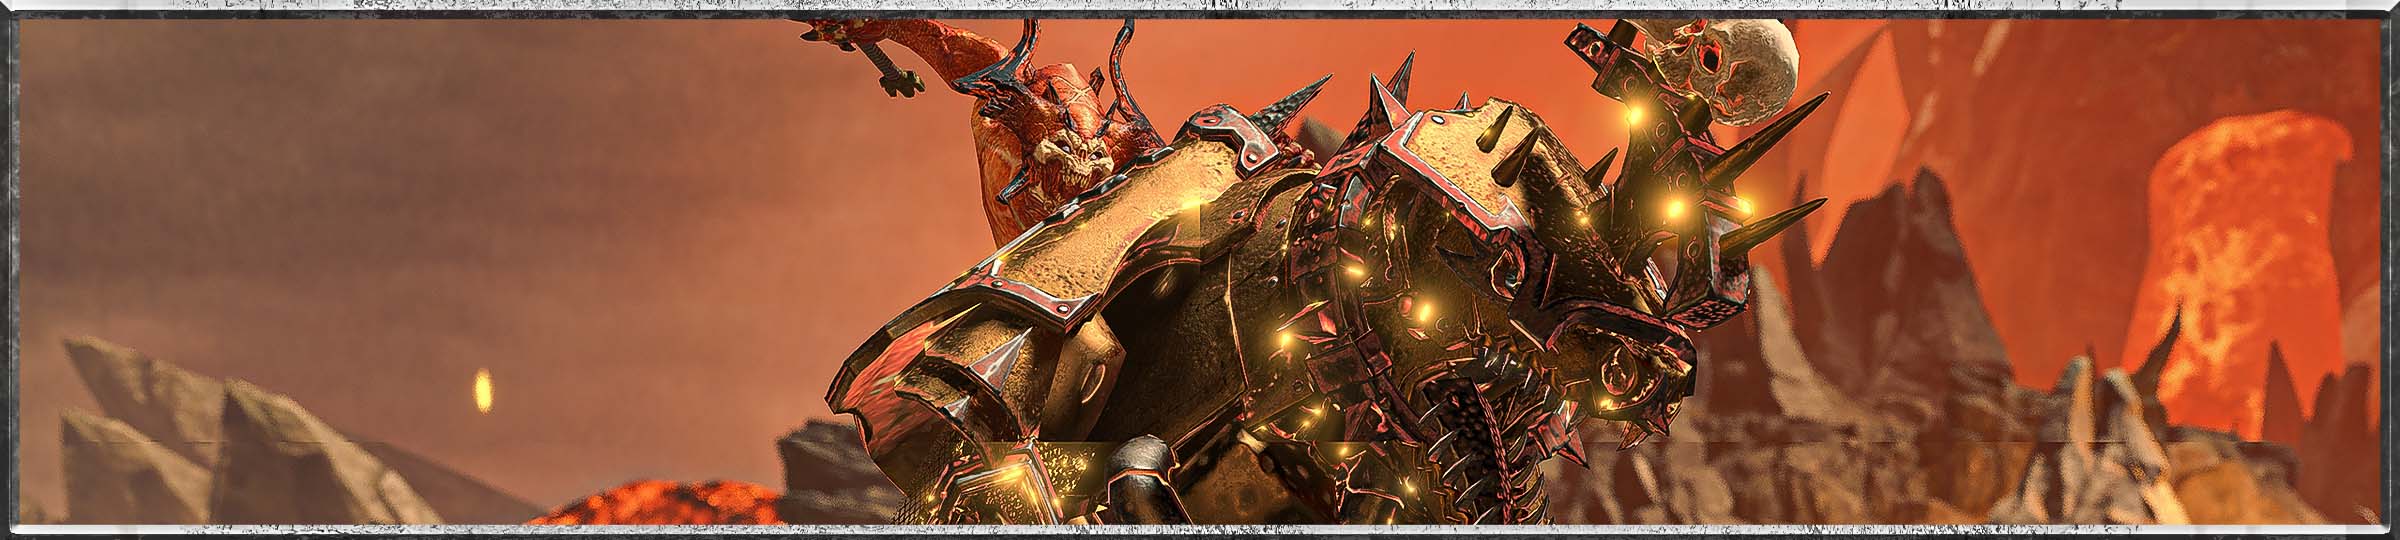 An image of Khorne's new Regiment of Renown unit: the Herald of Khorne's Fury.